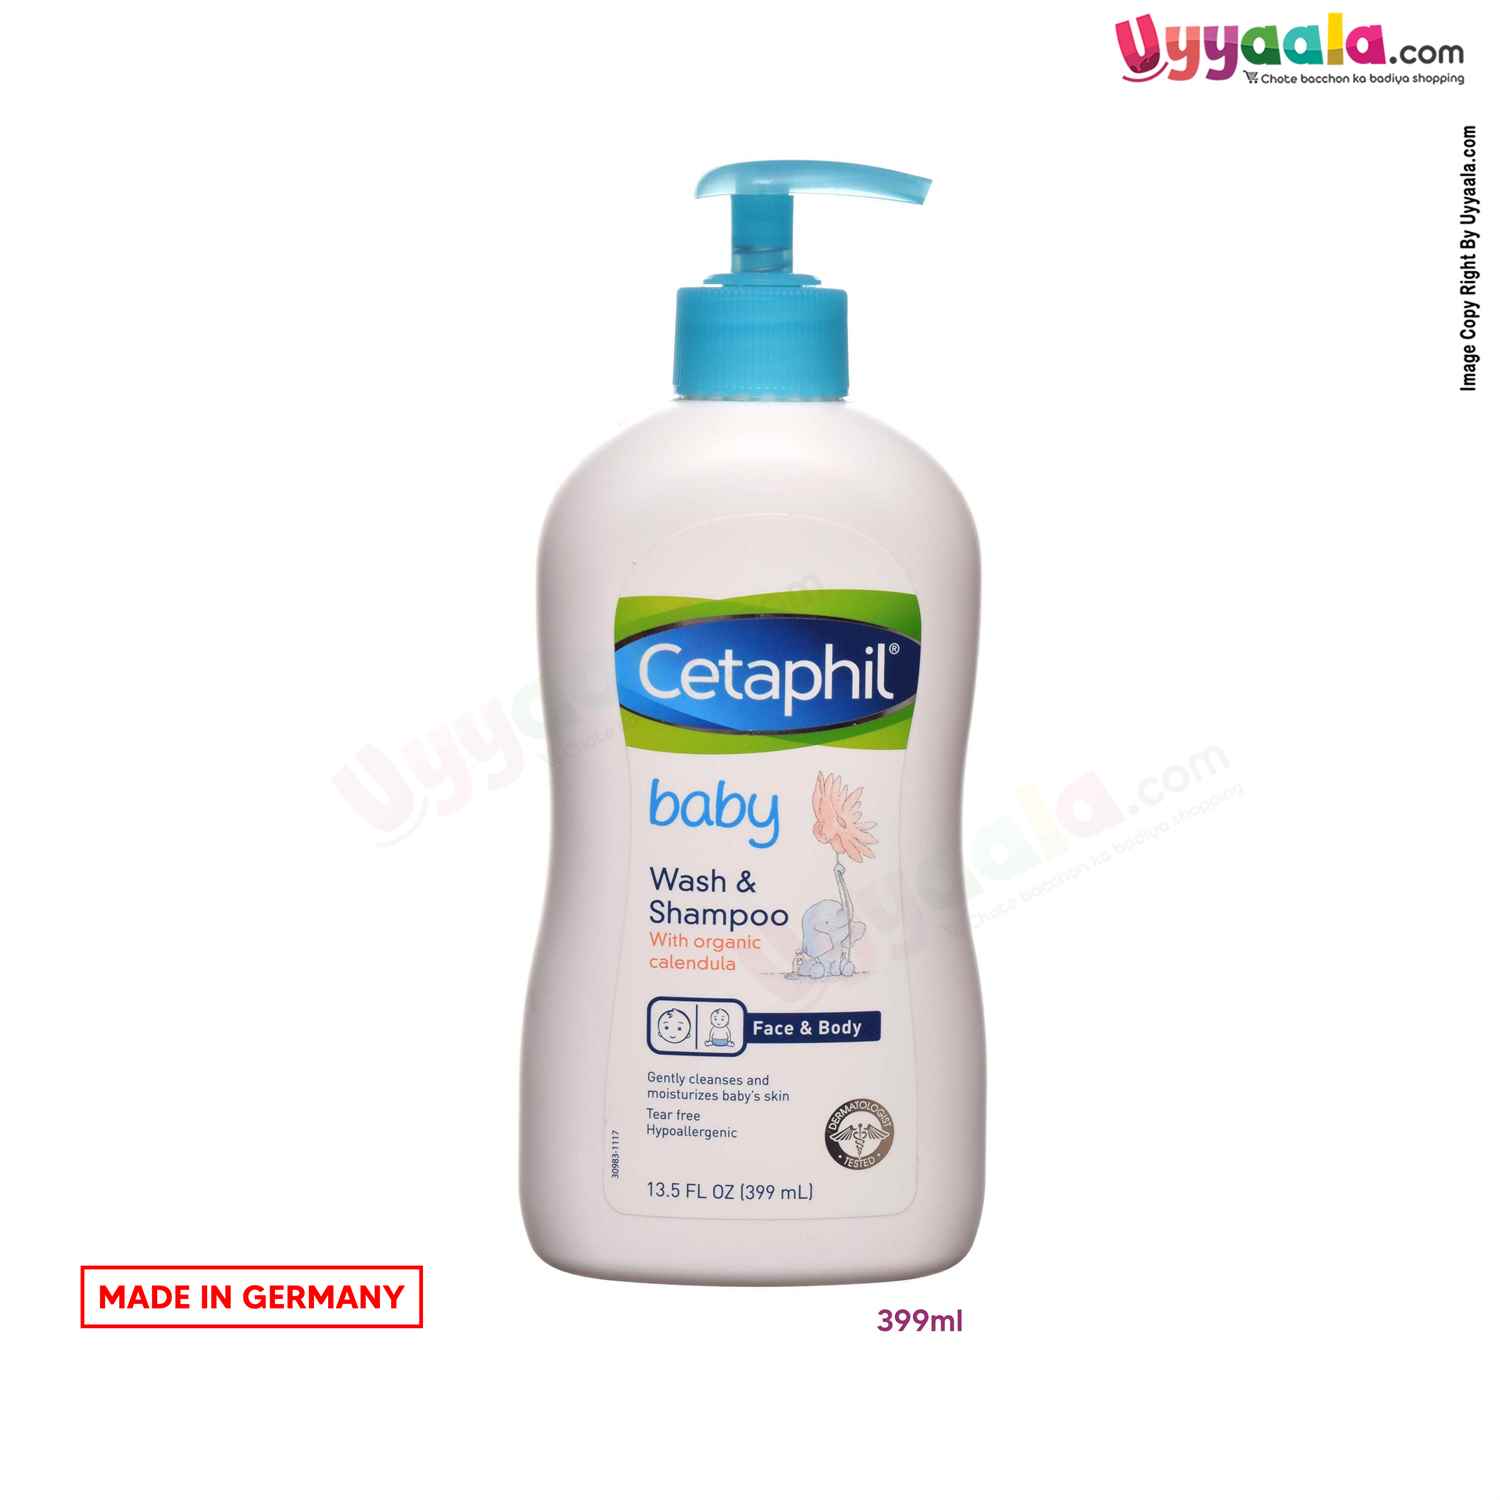 CETAPHIL Baby wash & Shampoo for face and body - 399ml (IMPORTED)